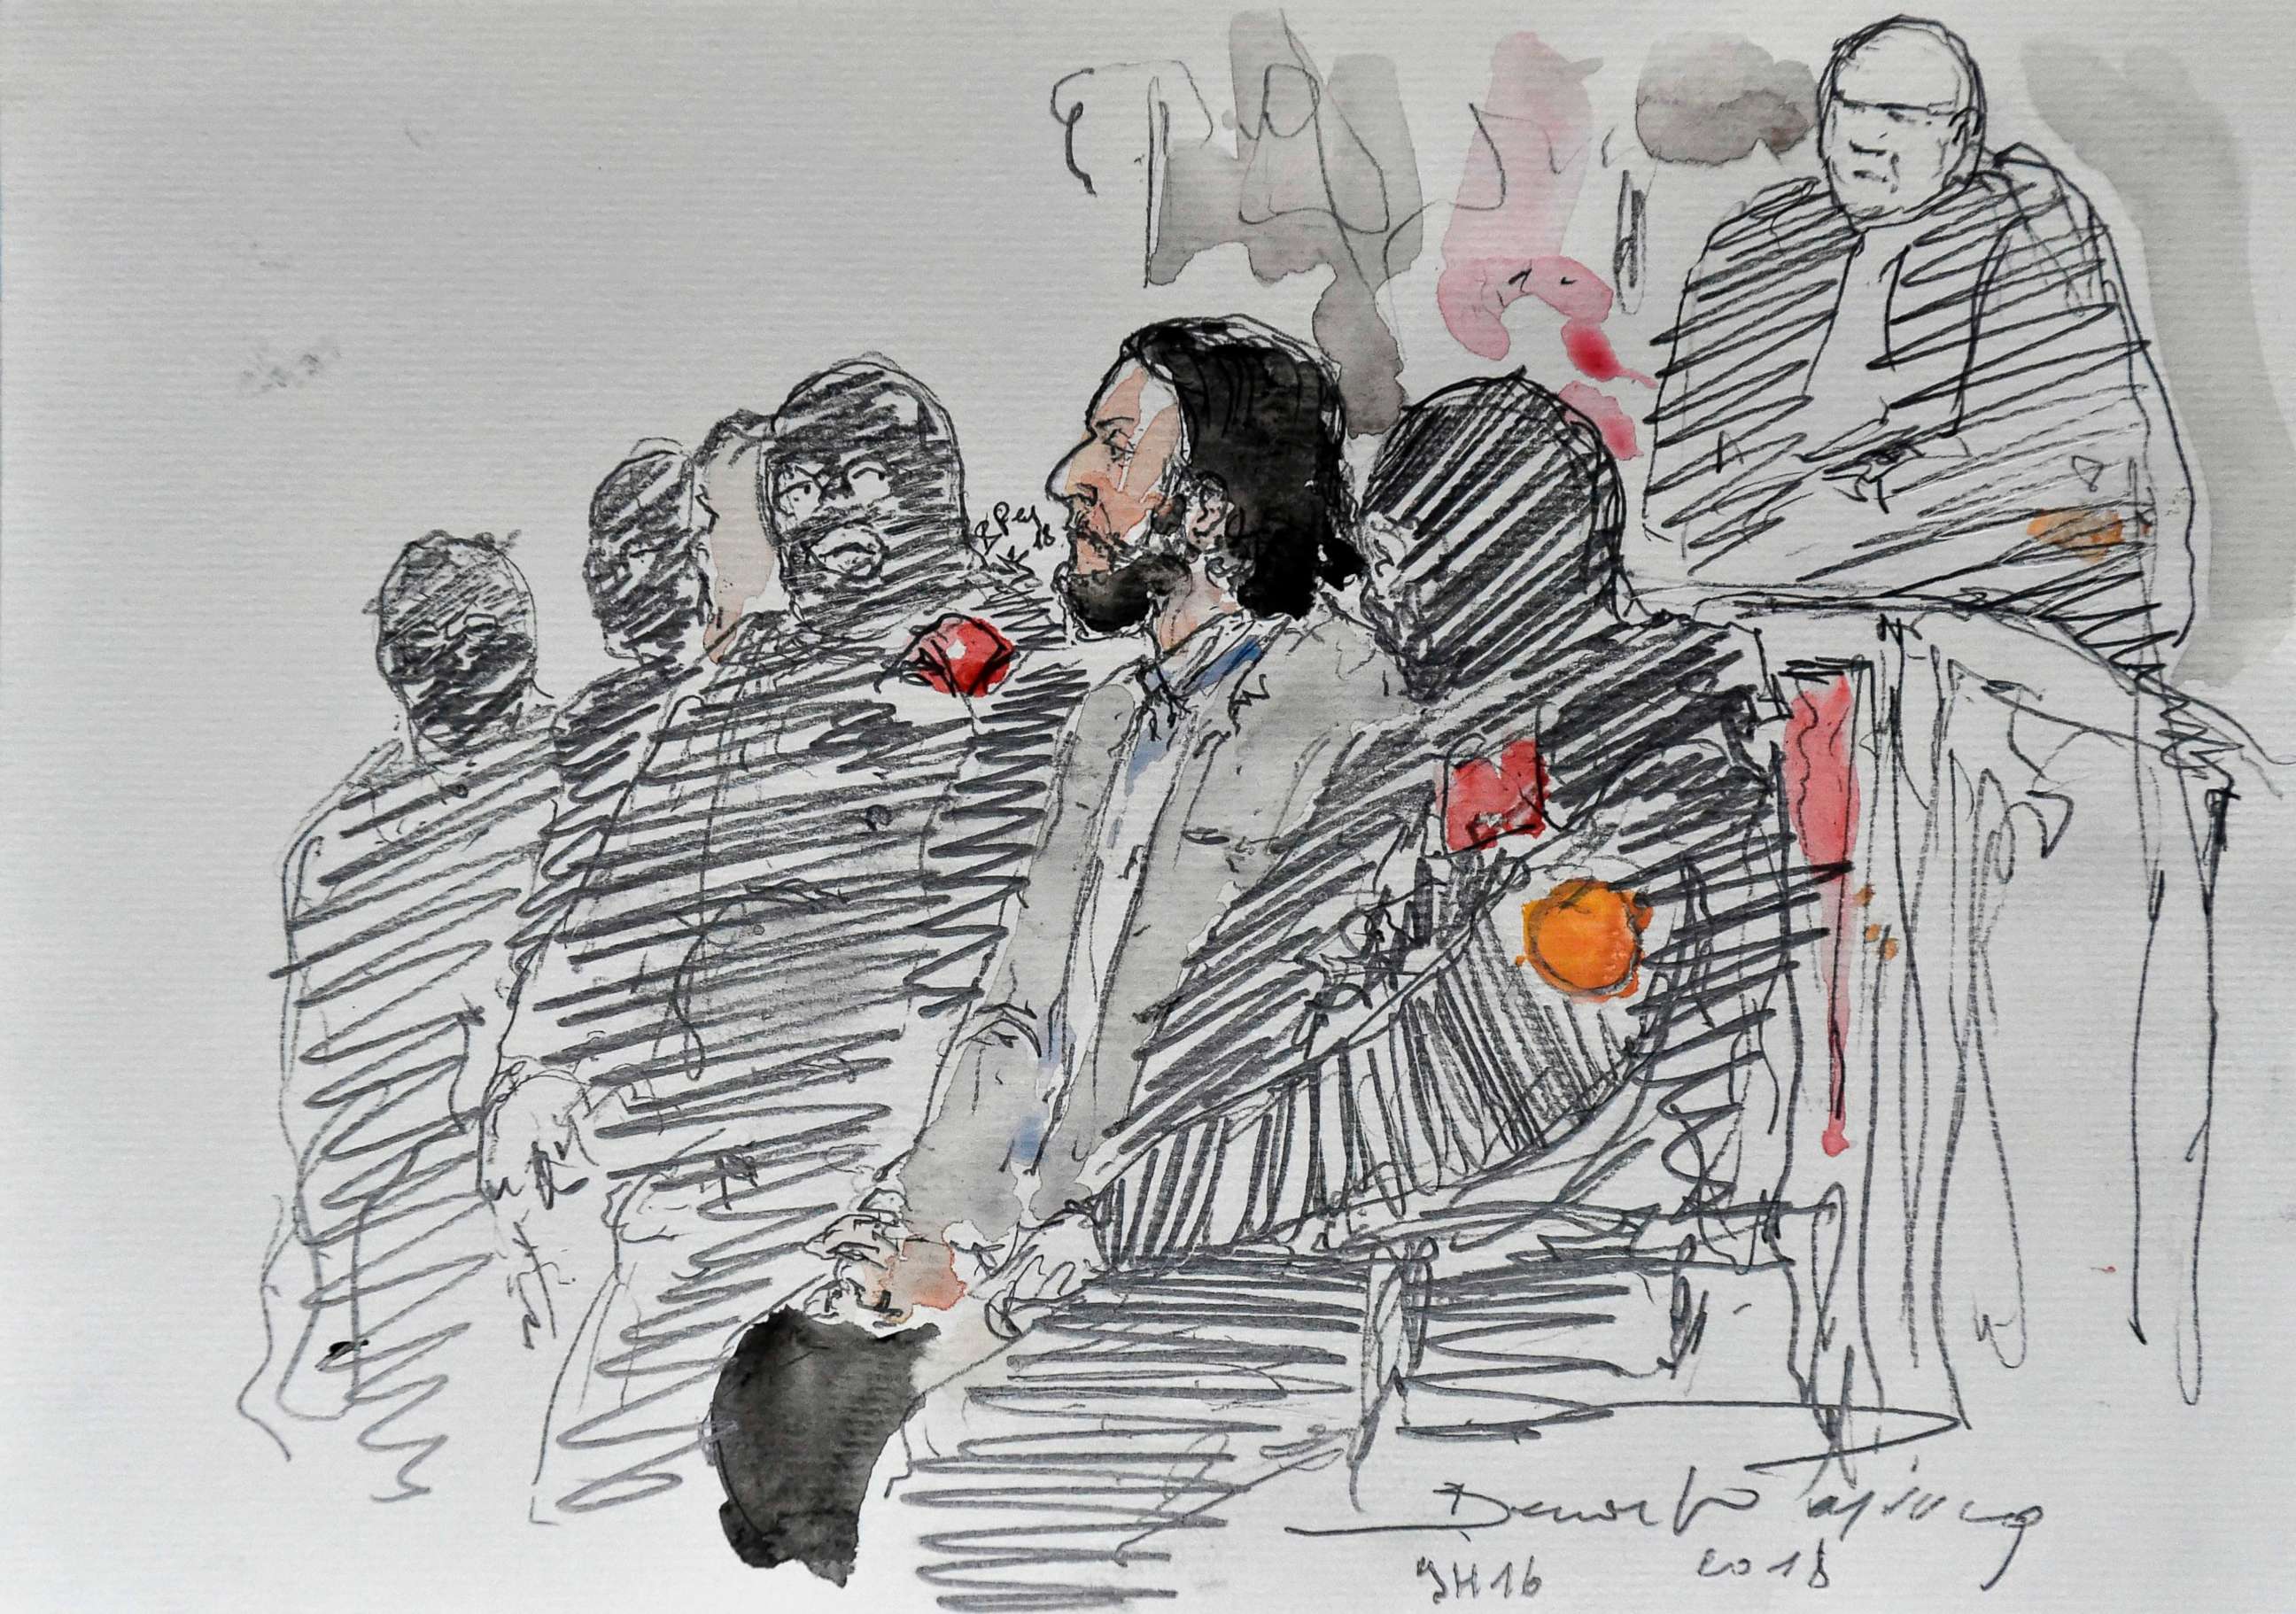 PHOTO: A courtroom sketch shows Salah Abdeslam, a suspect in the November 2015 Paris attacks, prior to the opening of his trial at the "Palais de Justice" courthouse in Brussels, Feb. 5, 2018.